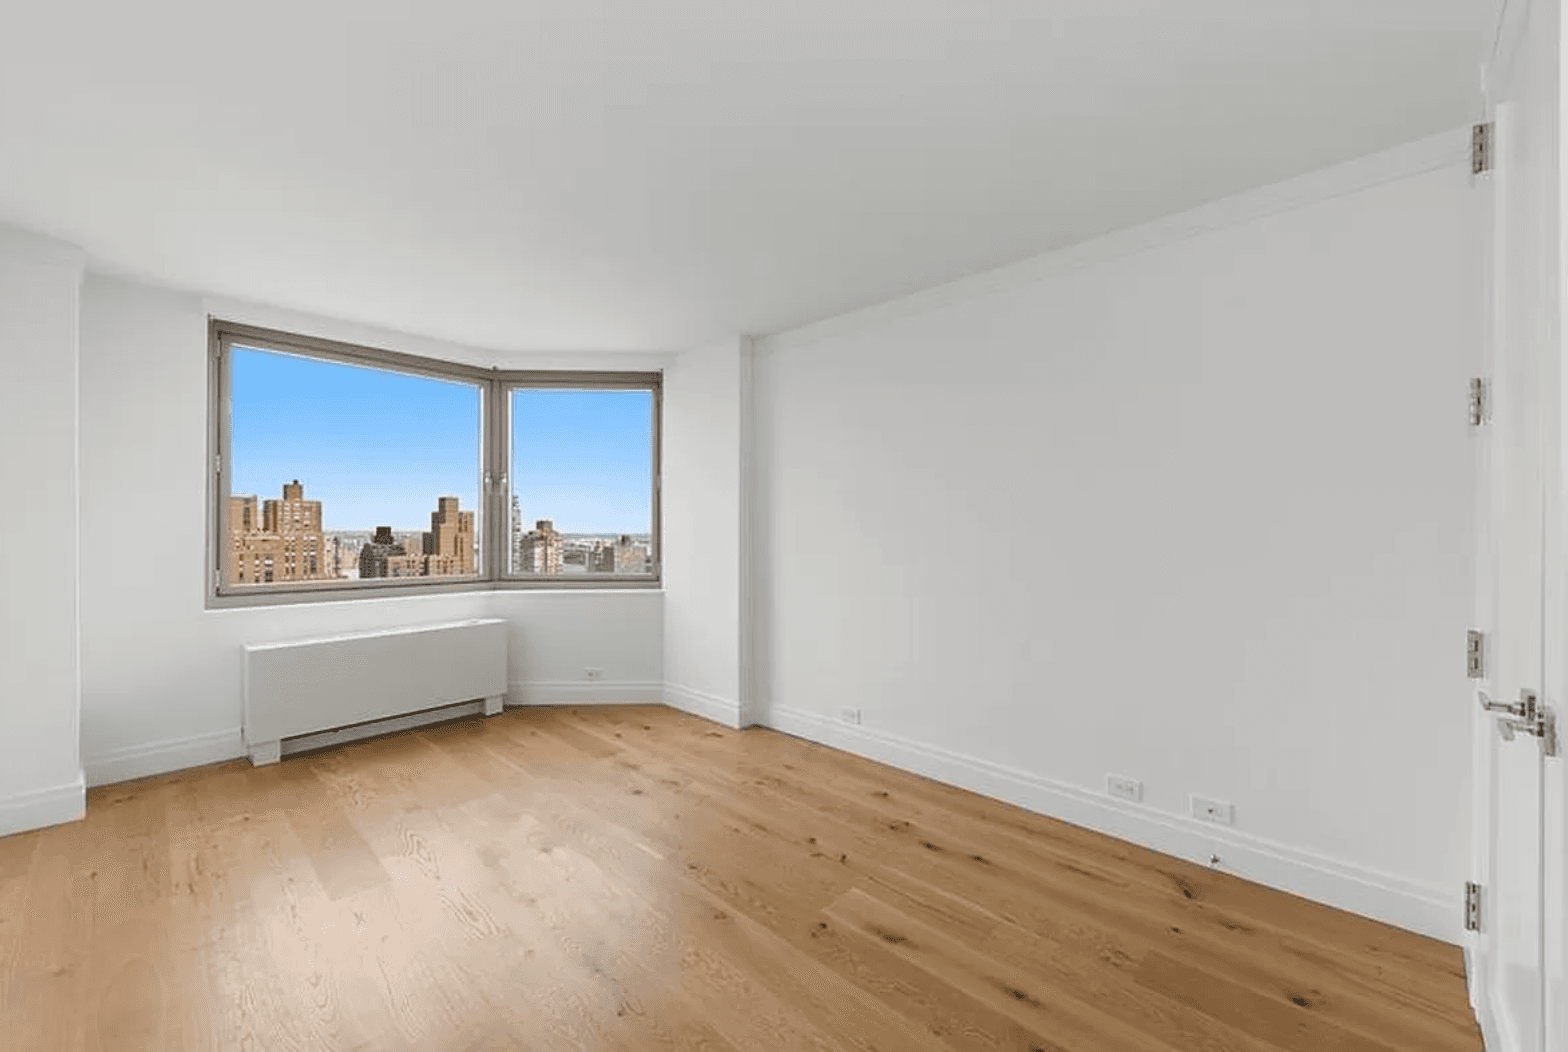 Spacious 3 Bedroom 2.5 Bath Apt with amazing natural light on the Upper East Side